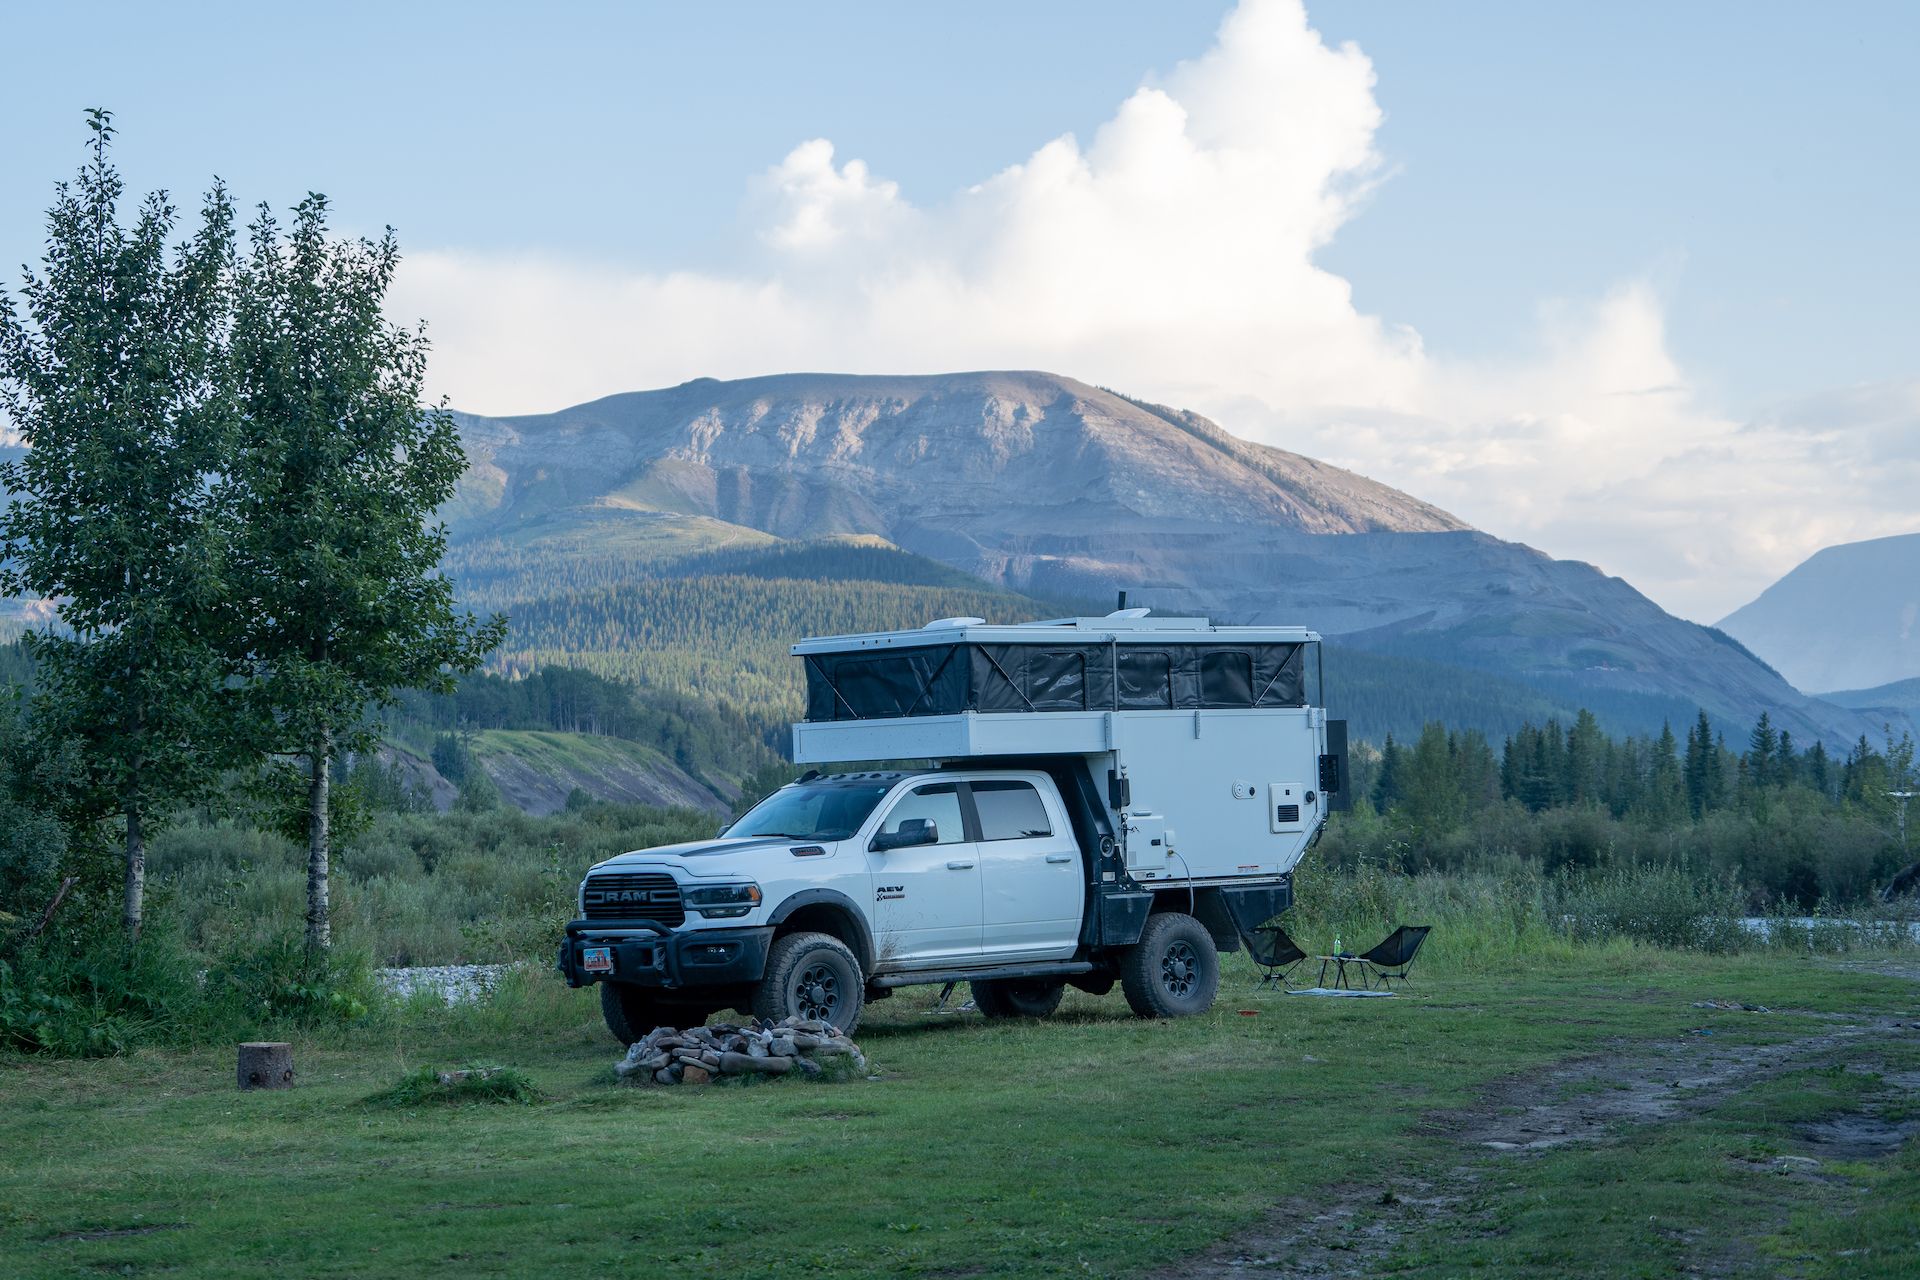 As we headed north via the backroads, we found a wonderful place to camp near the mining community of Cadomin. We enjoyed the campsite so much that we decided to stay for 2 nights!